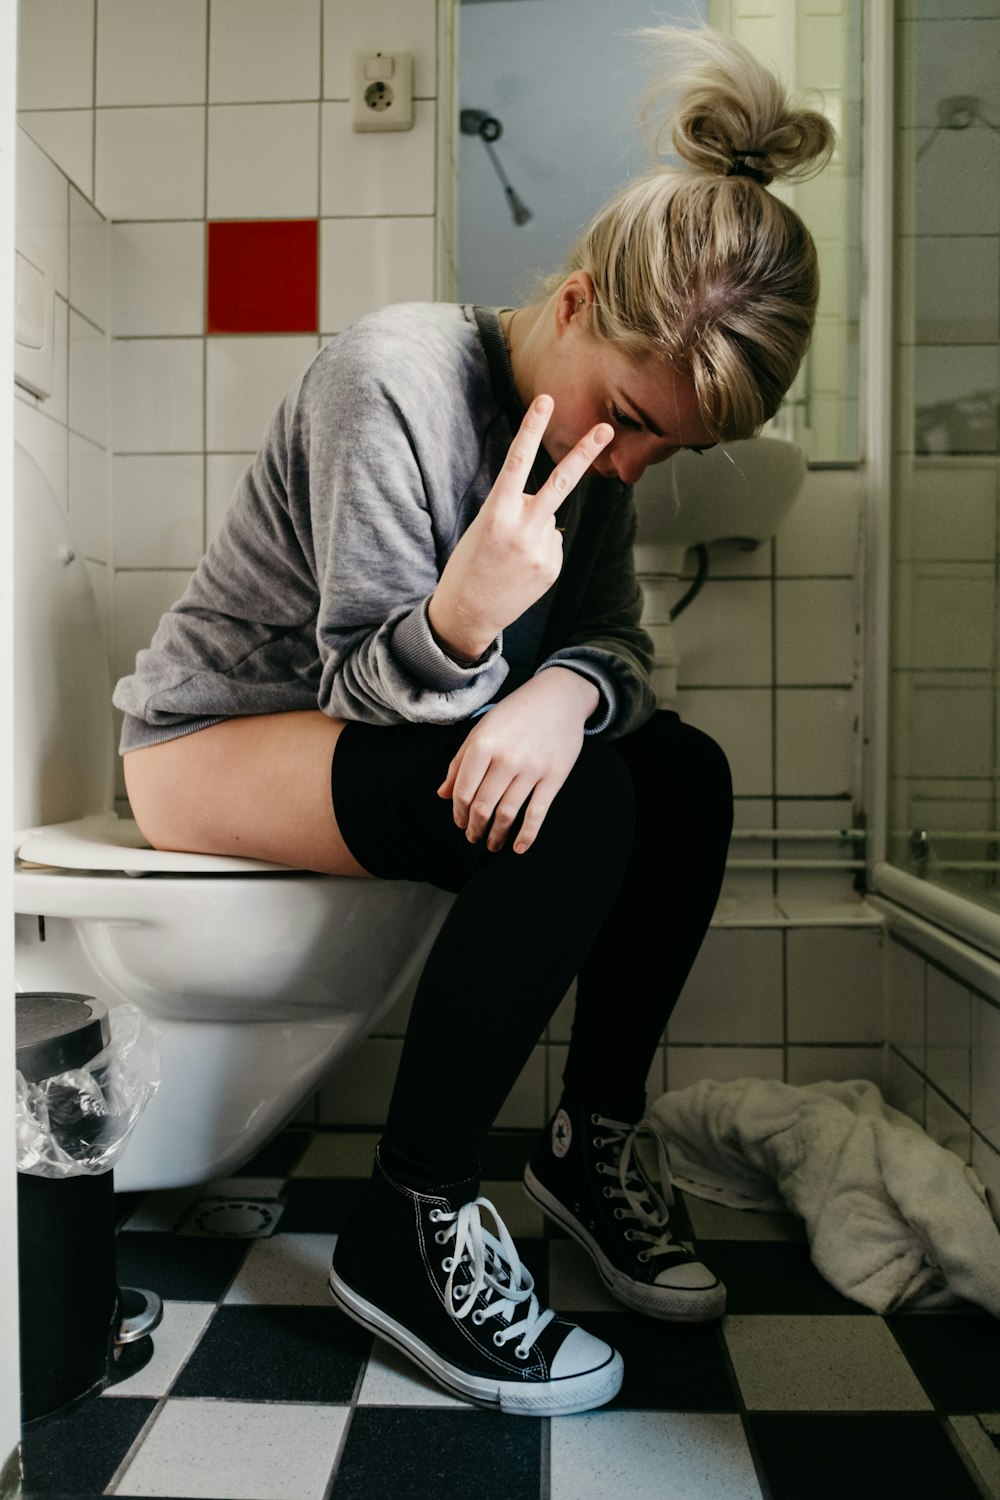 woman sitting on toilet bowl showing peace hand sign